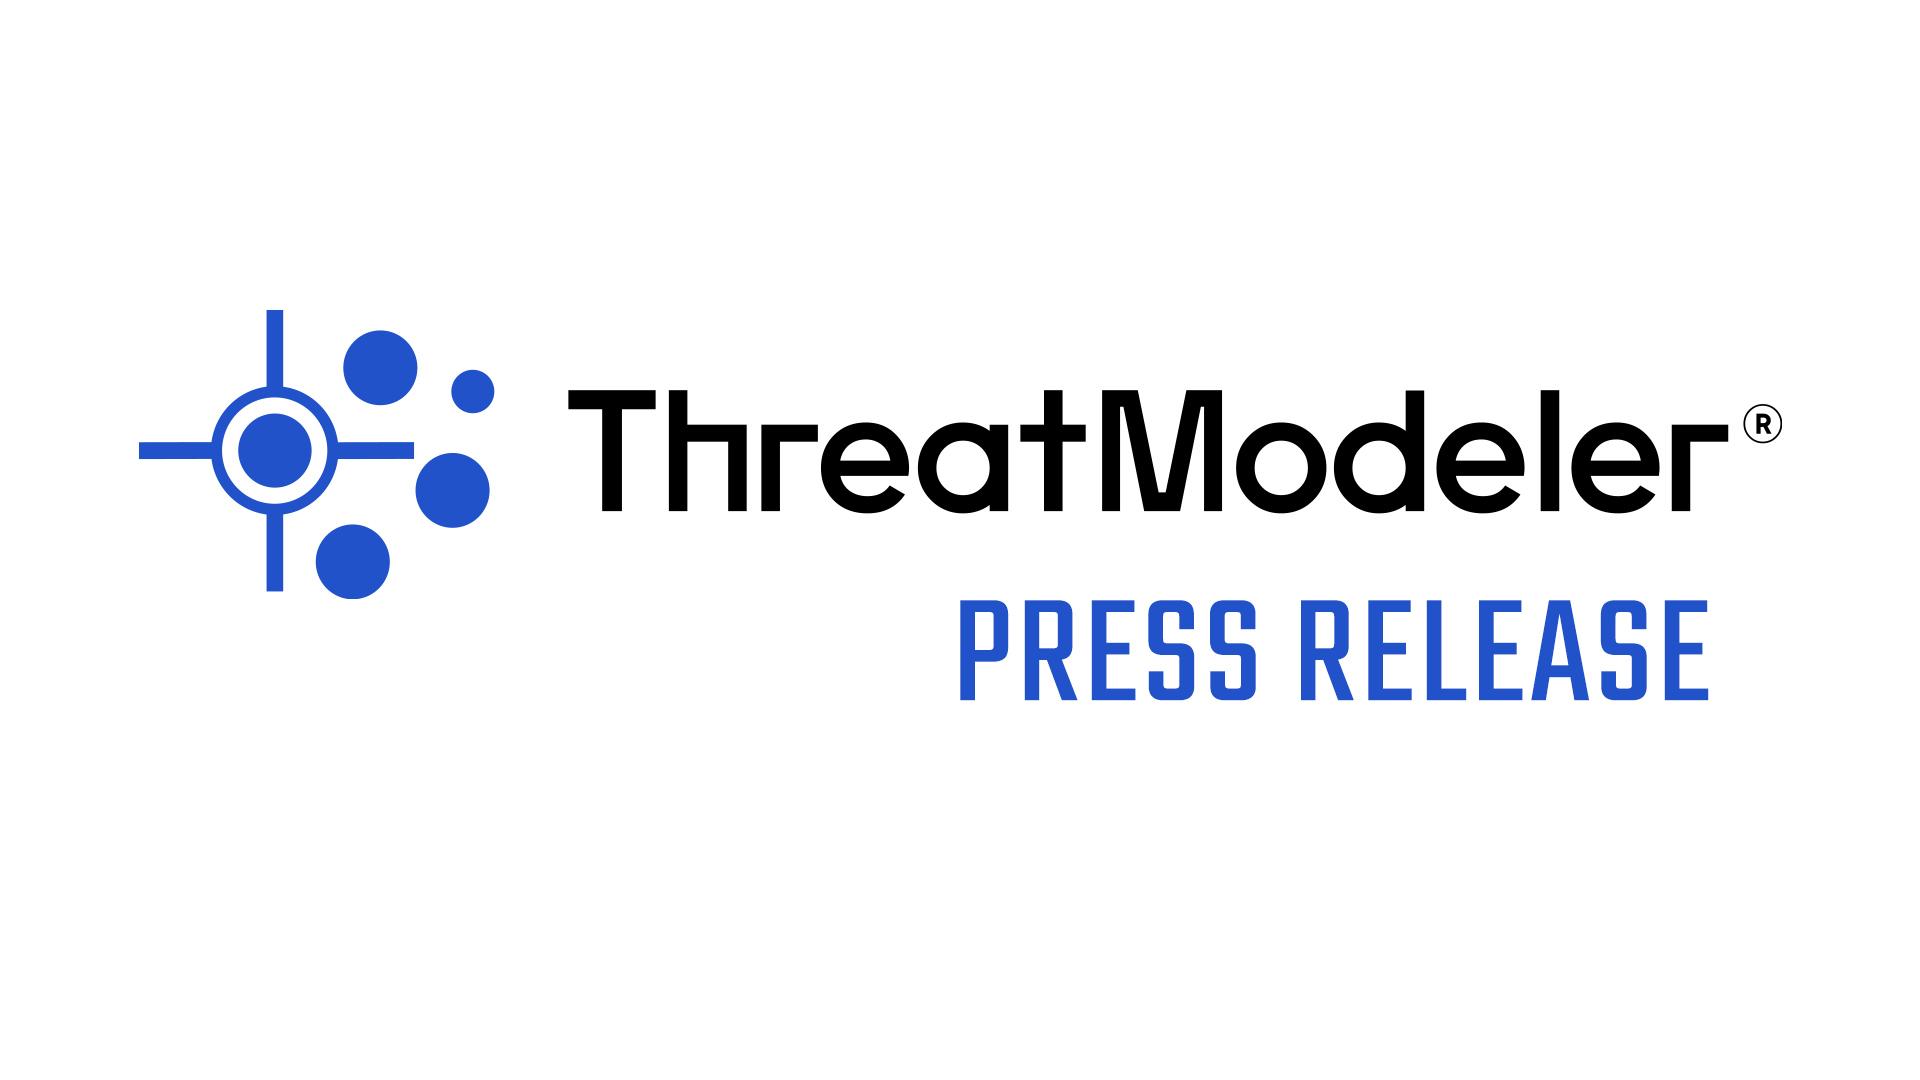 ThreatModeler Community offers an array of important resources to enterprises leveraging threat modeling for advanced security and compliance